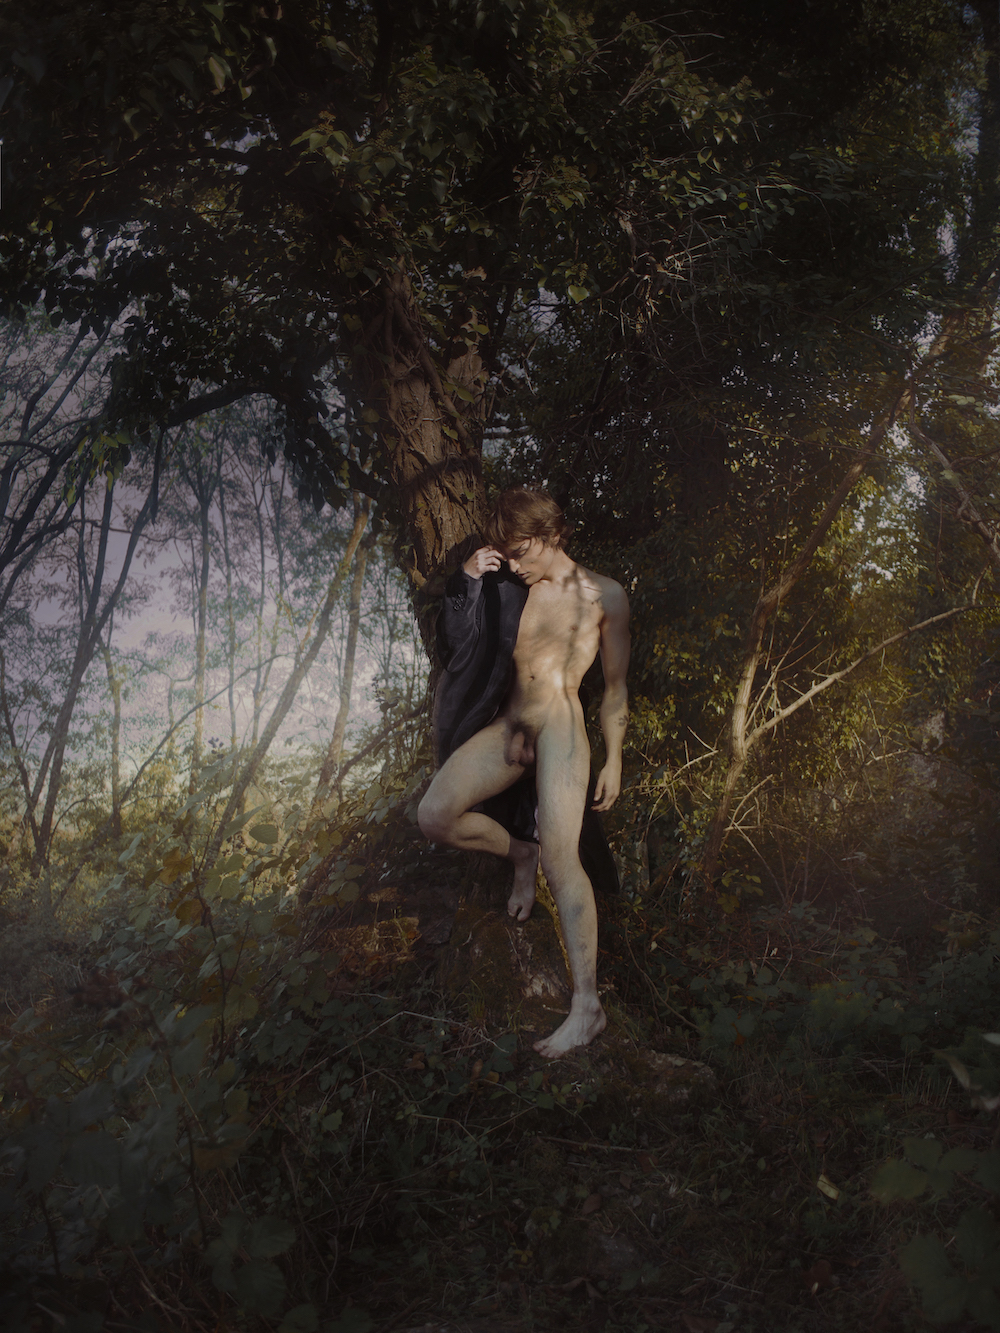 Nude against a tree - sized